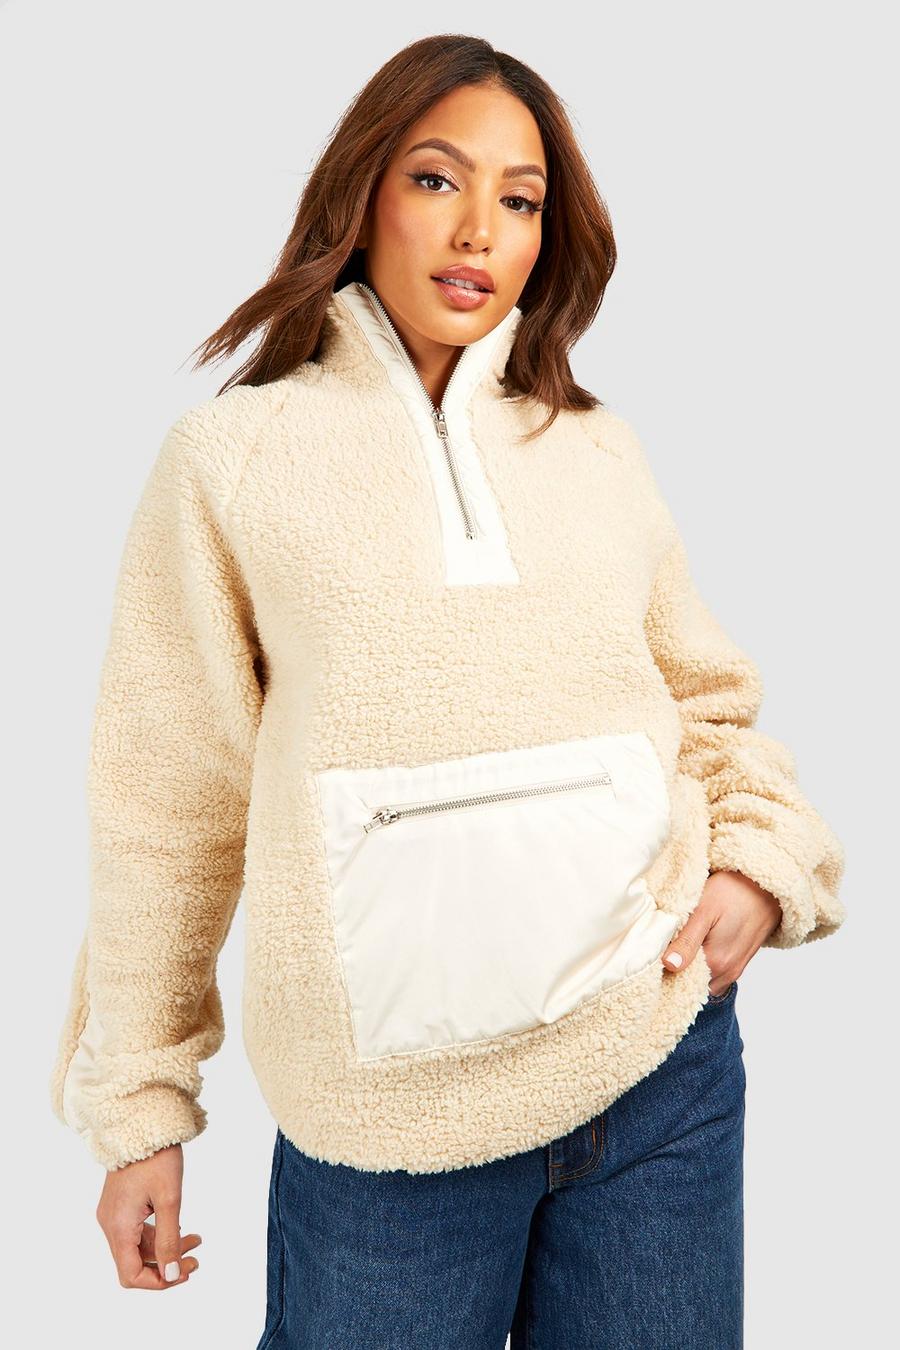 Womens Oversized Hoodies 1/4 Zip High Neck Sweatshirts with Pocket Long  Sleeve Cozy Plain Pullover Sweater Tops (3X-Large, Beige)